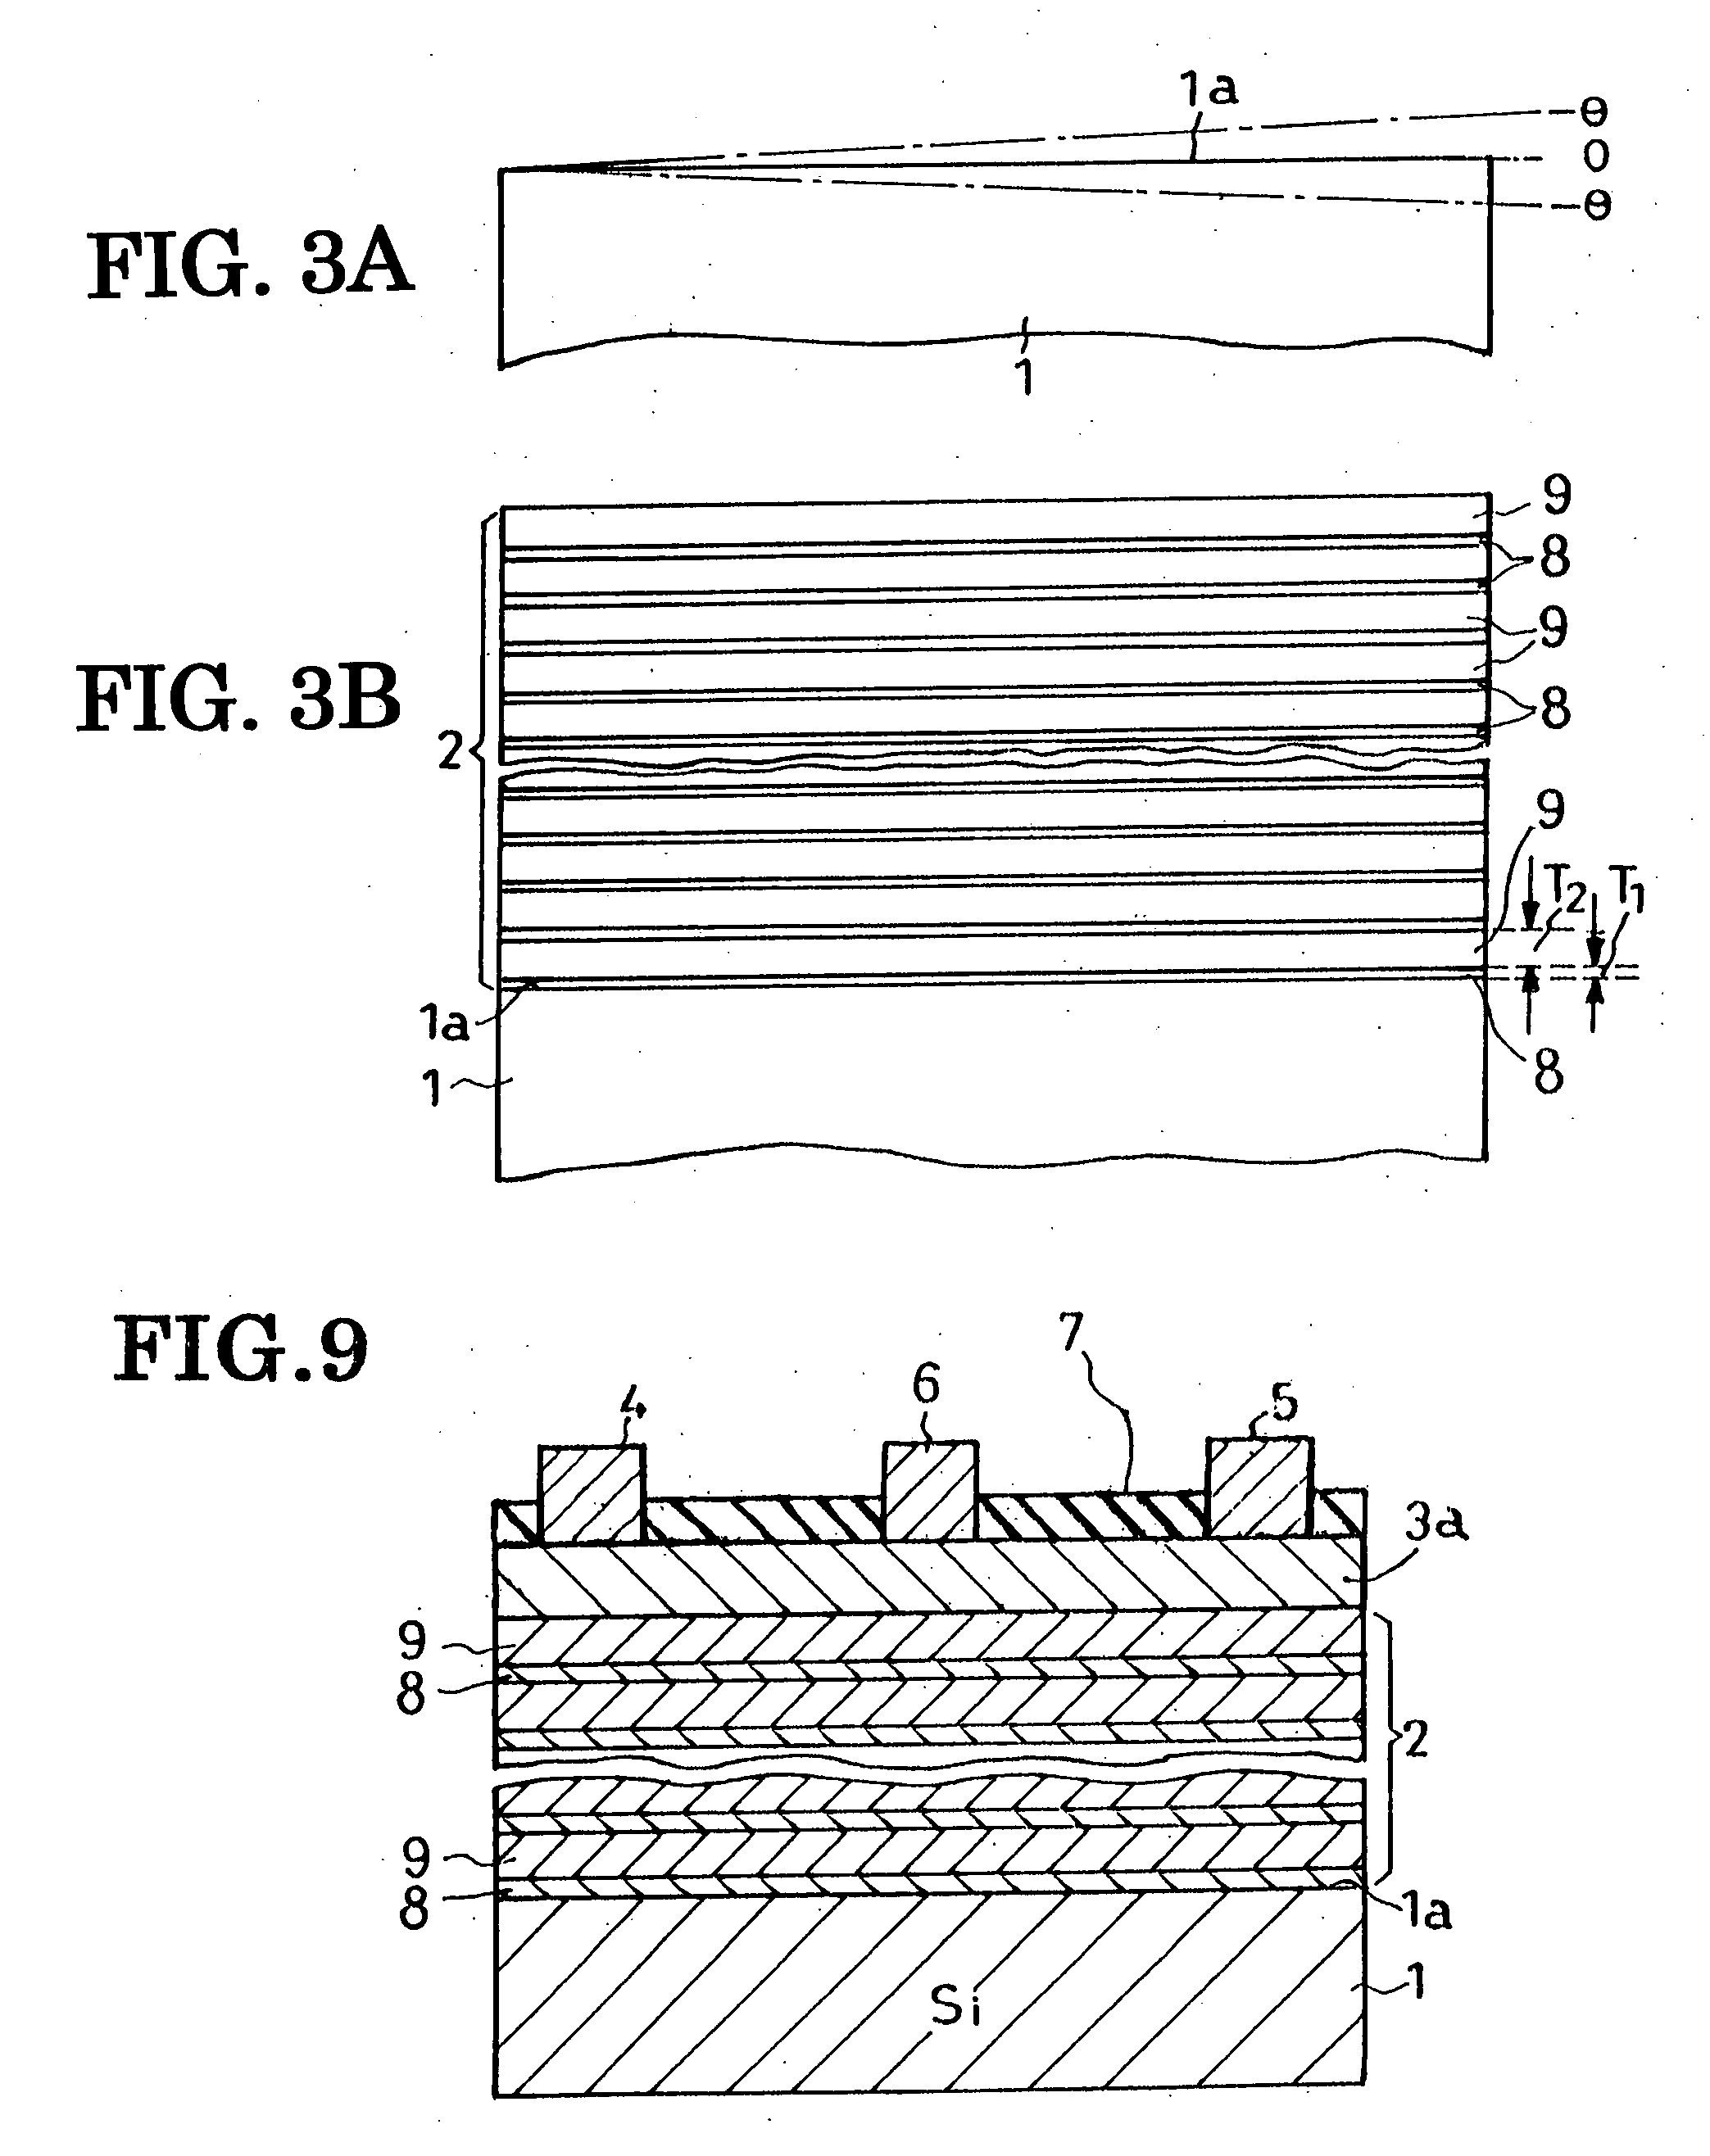 Semiconductor device with reduced leakage current, and method of fabrication